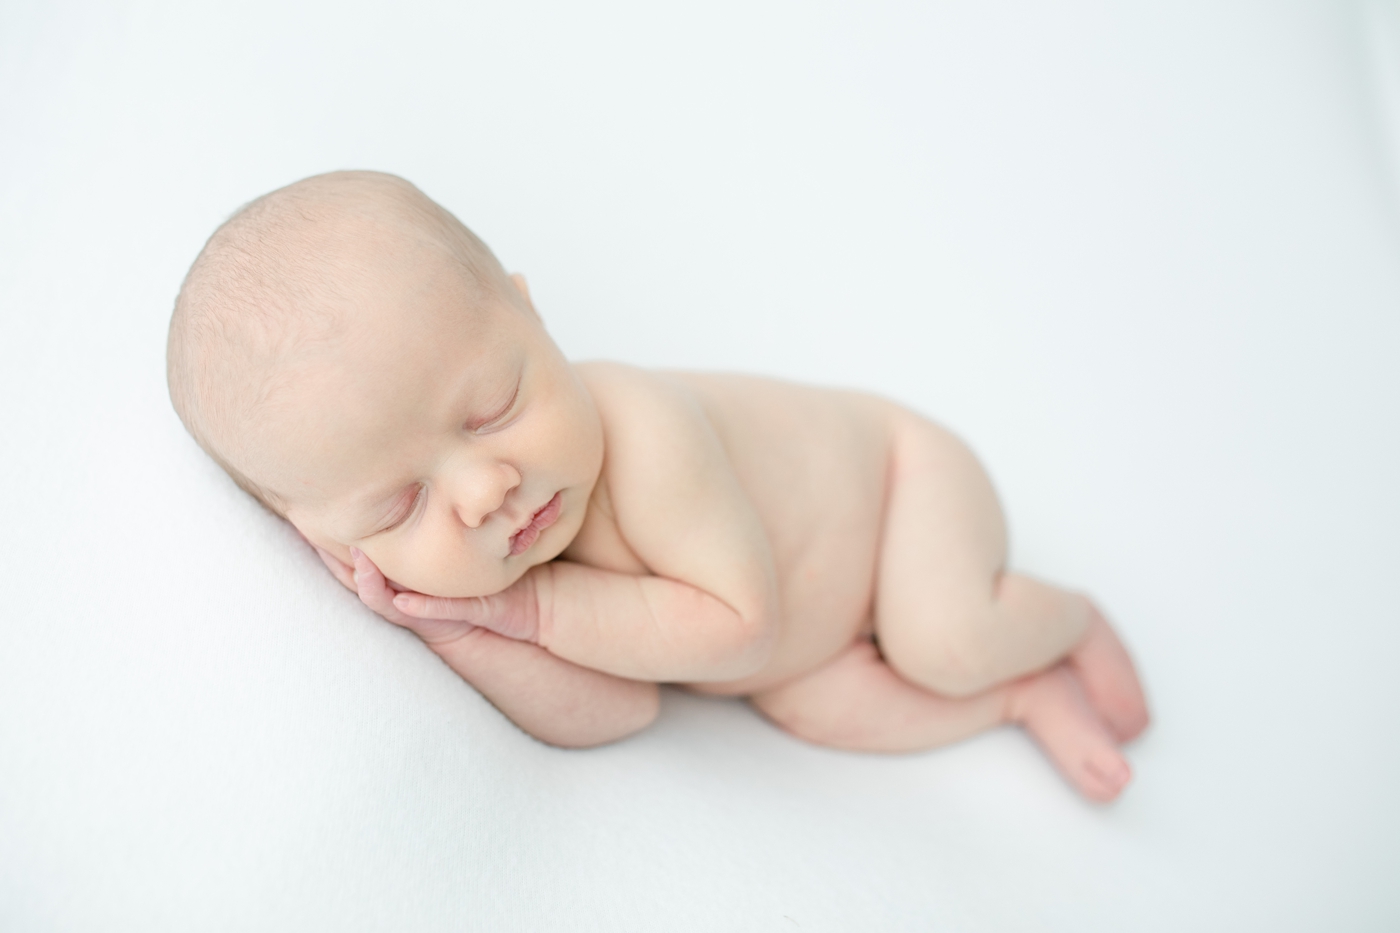 Simple and classic newborn image with baby boy's hands folded under chin. Photo by Little Sunshine Photography.